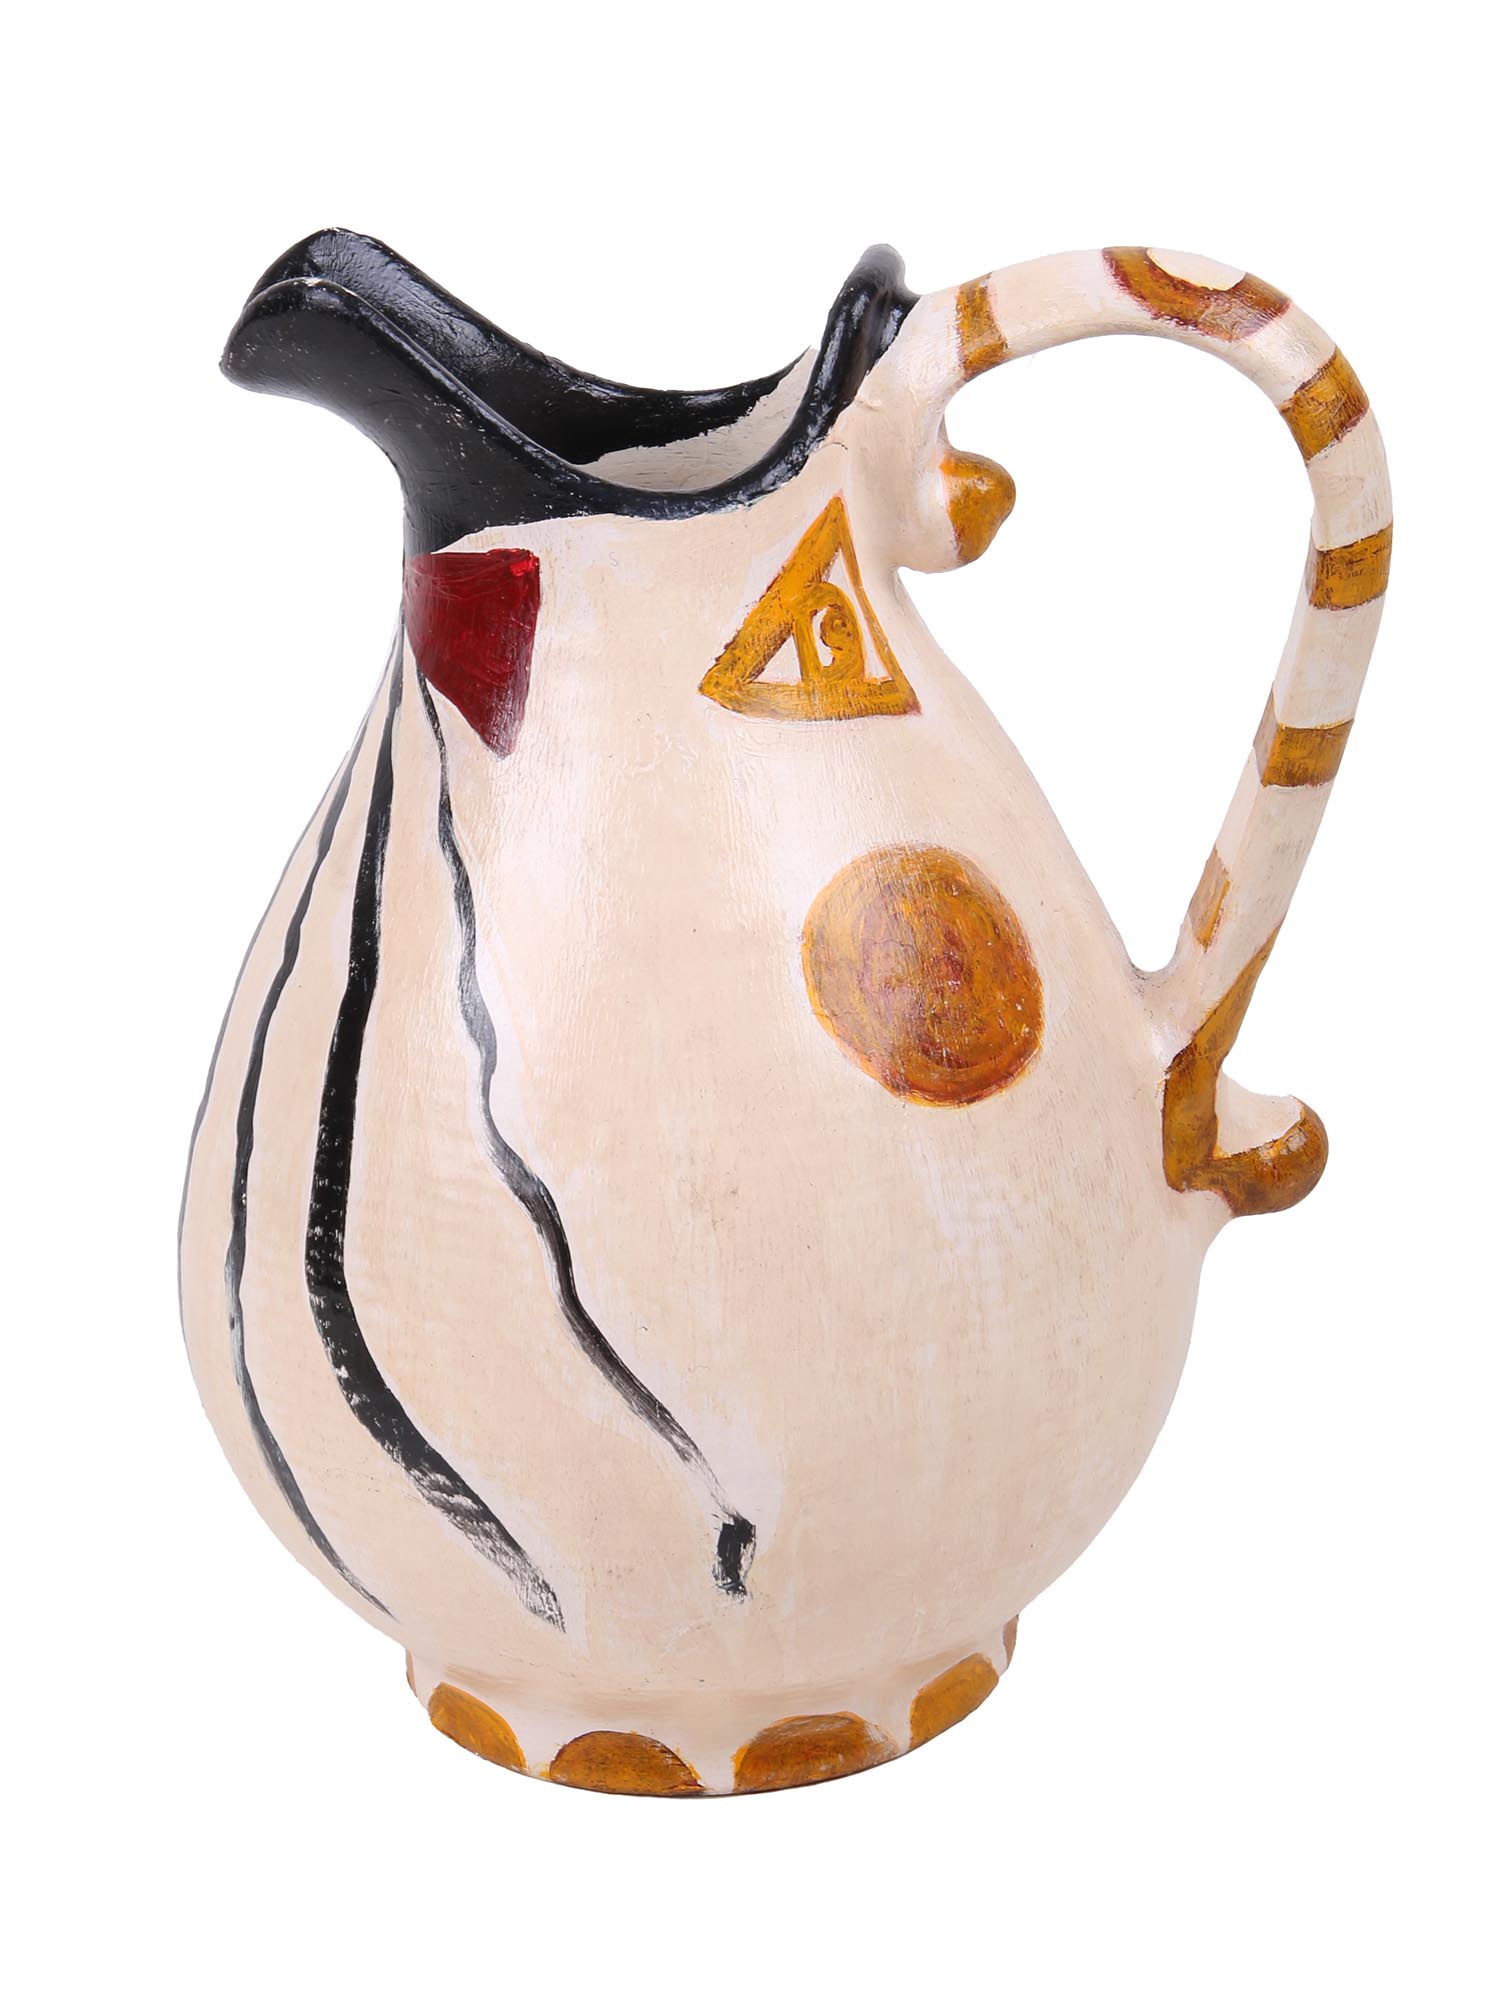 PABLO PICASSO MADOURA POTTERY LIMITED EDITION JUG PIC-2